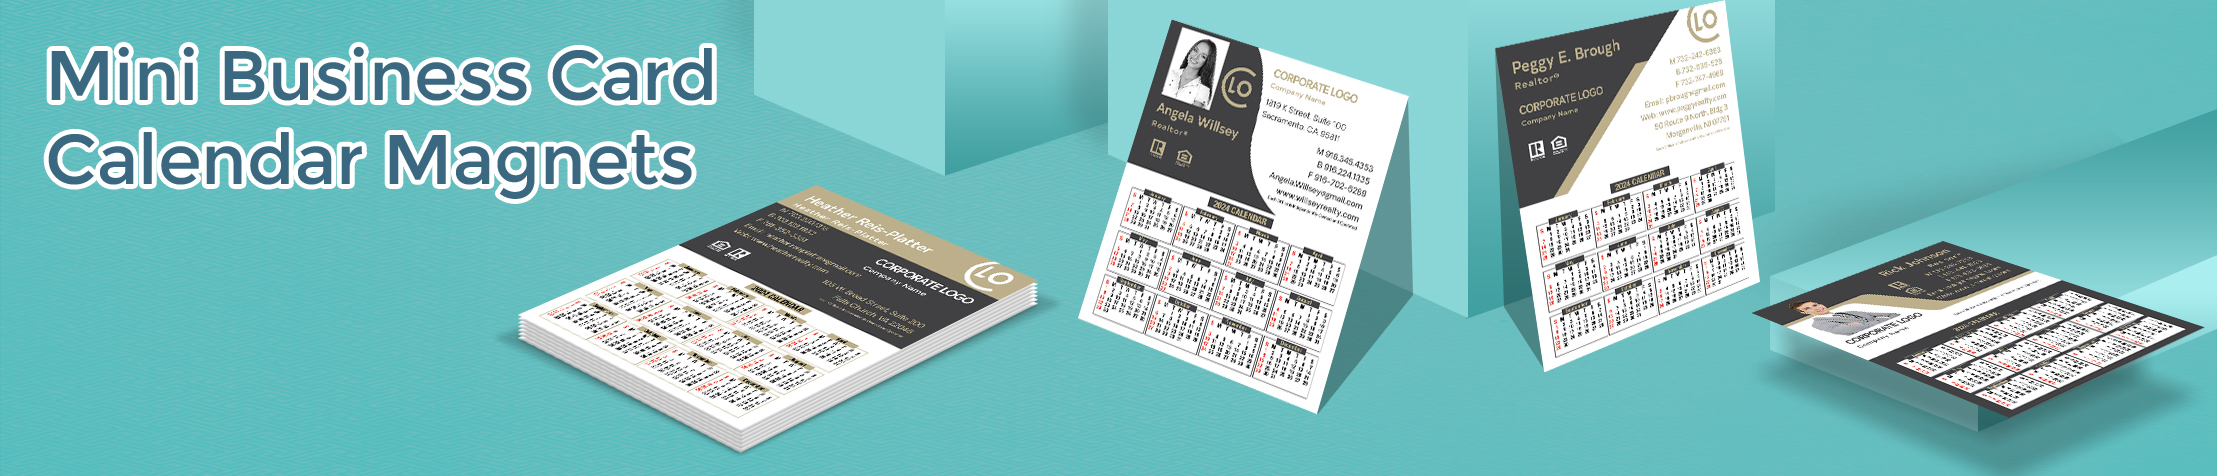 Century 21 Real Estate Mini Business Card Calendar Magnets - Century 21 2019 calendars with photo and contact info, 3.5” by 4.25” | BestPrintBuy.com